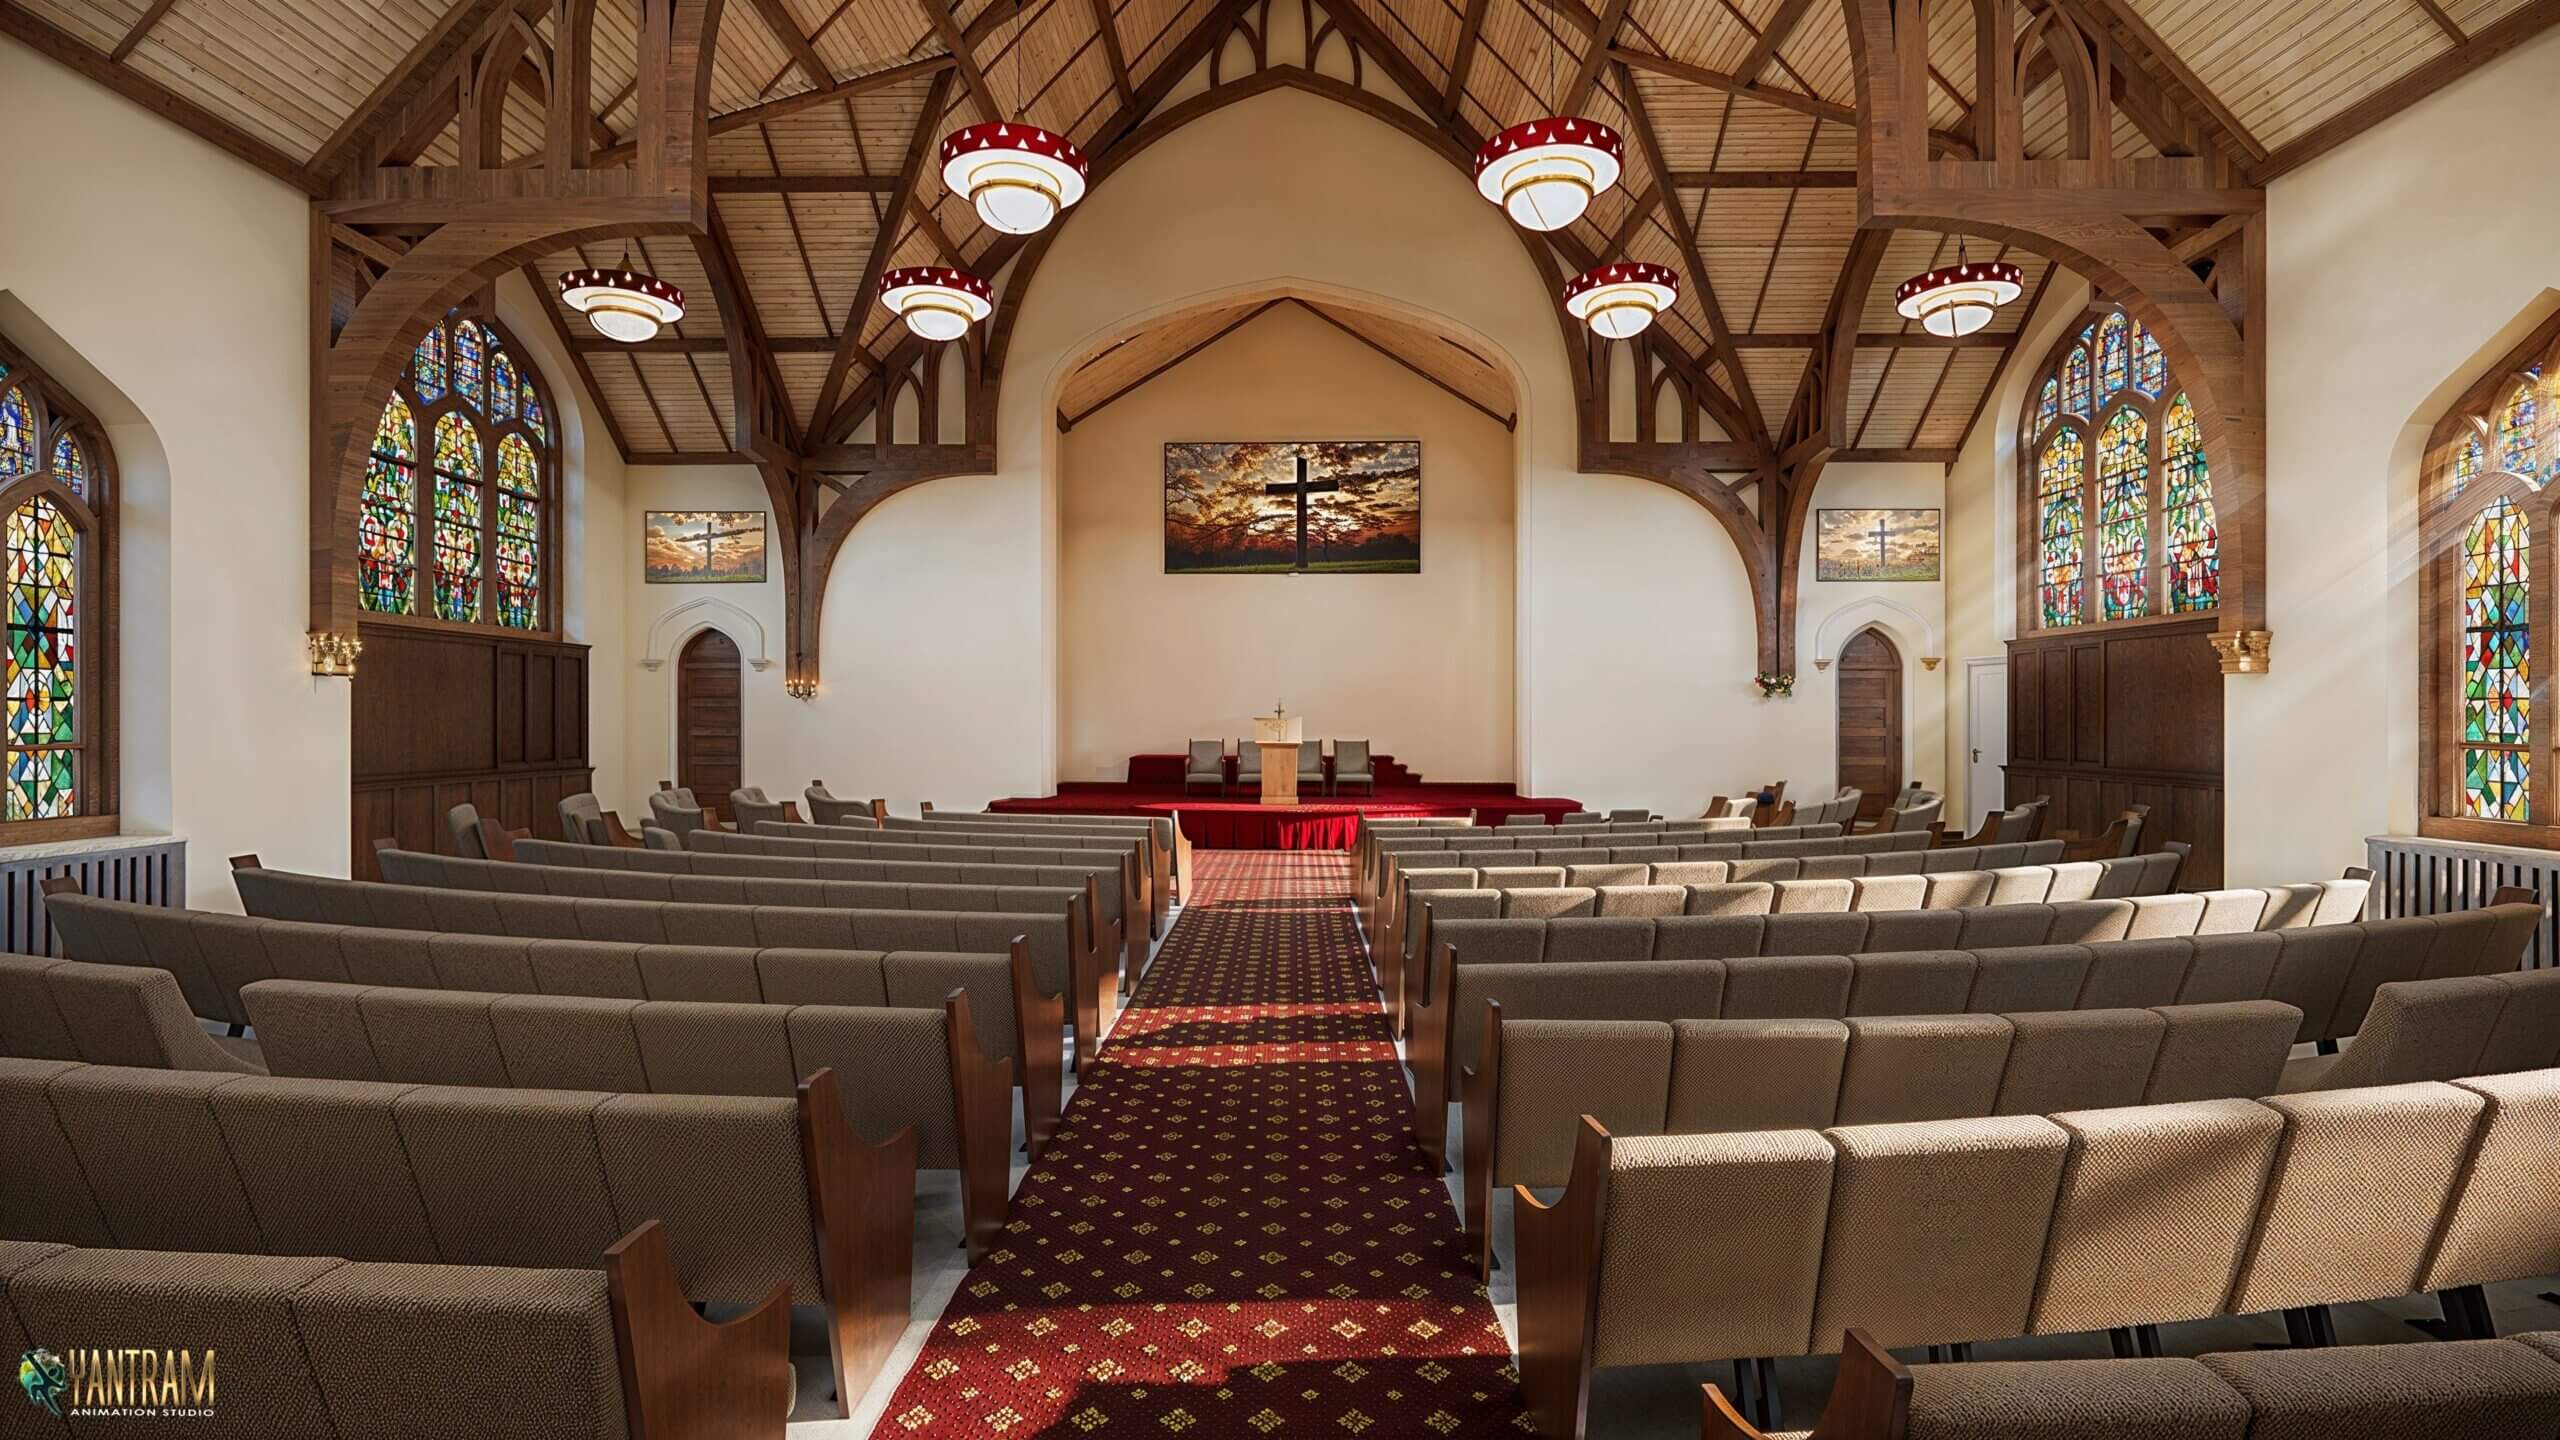 Transforming Sacred Spaces Reviving Church Halls Through 3D Architectural Rendering